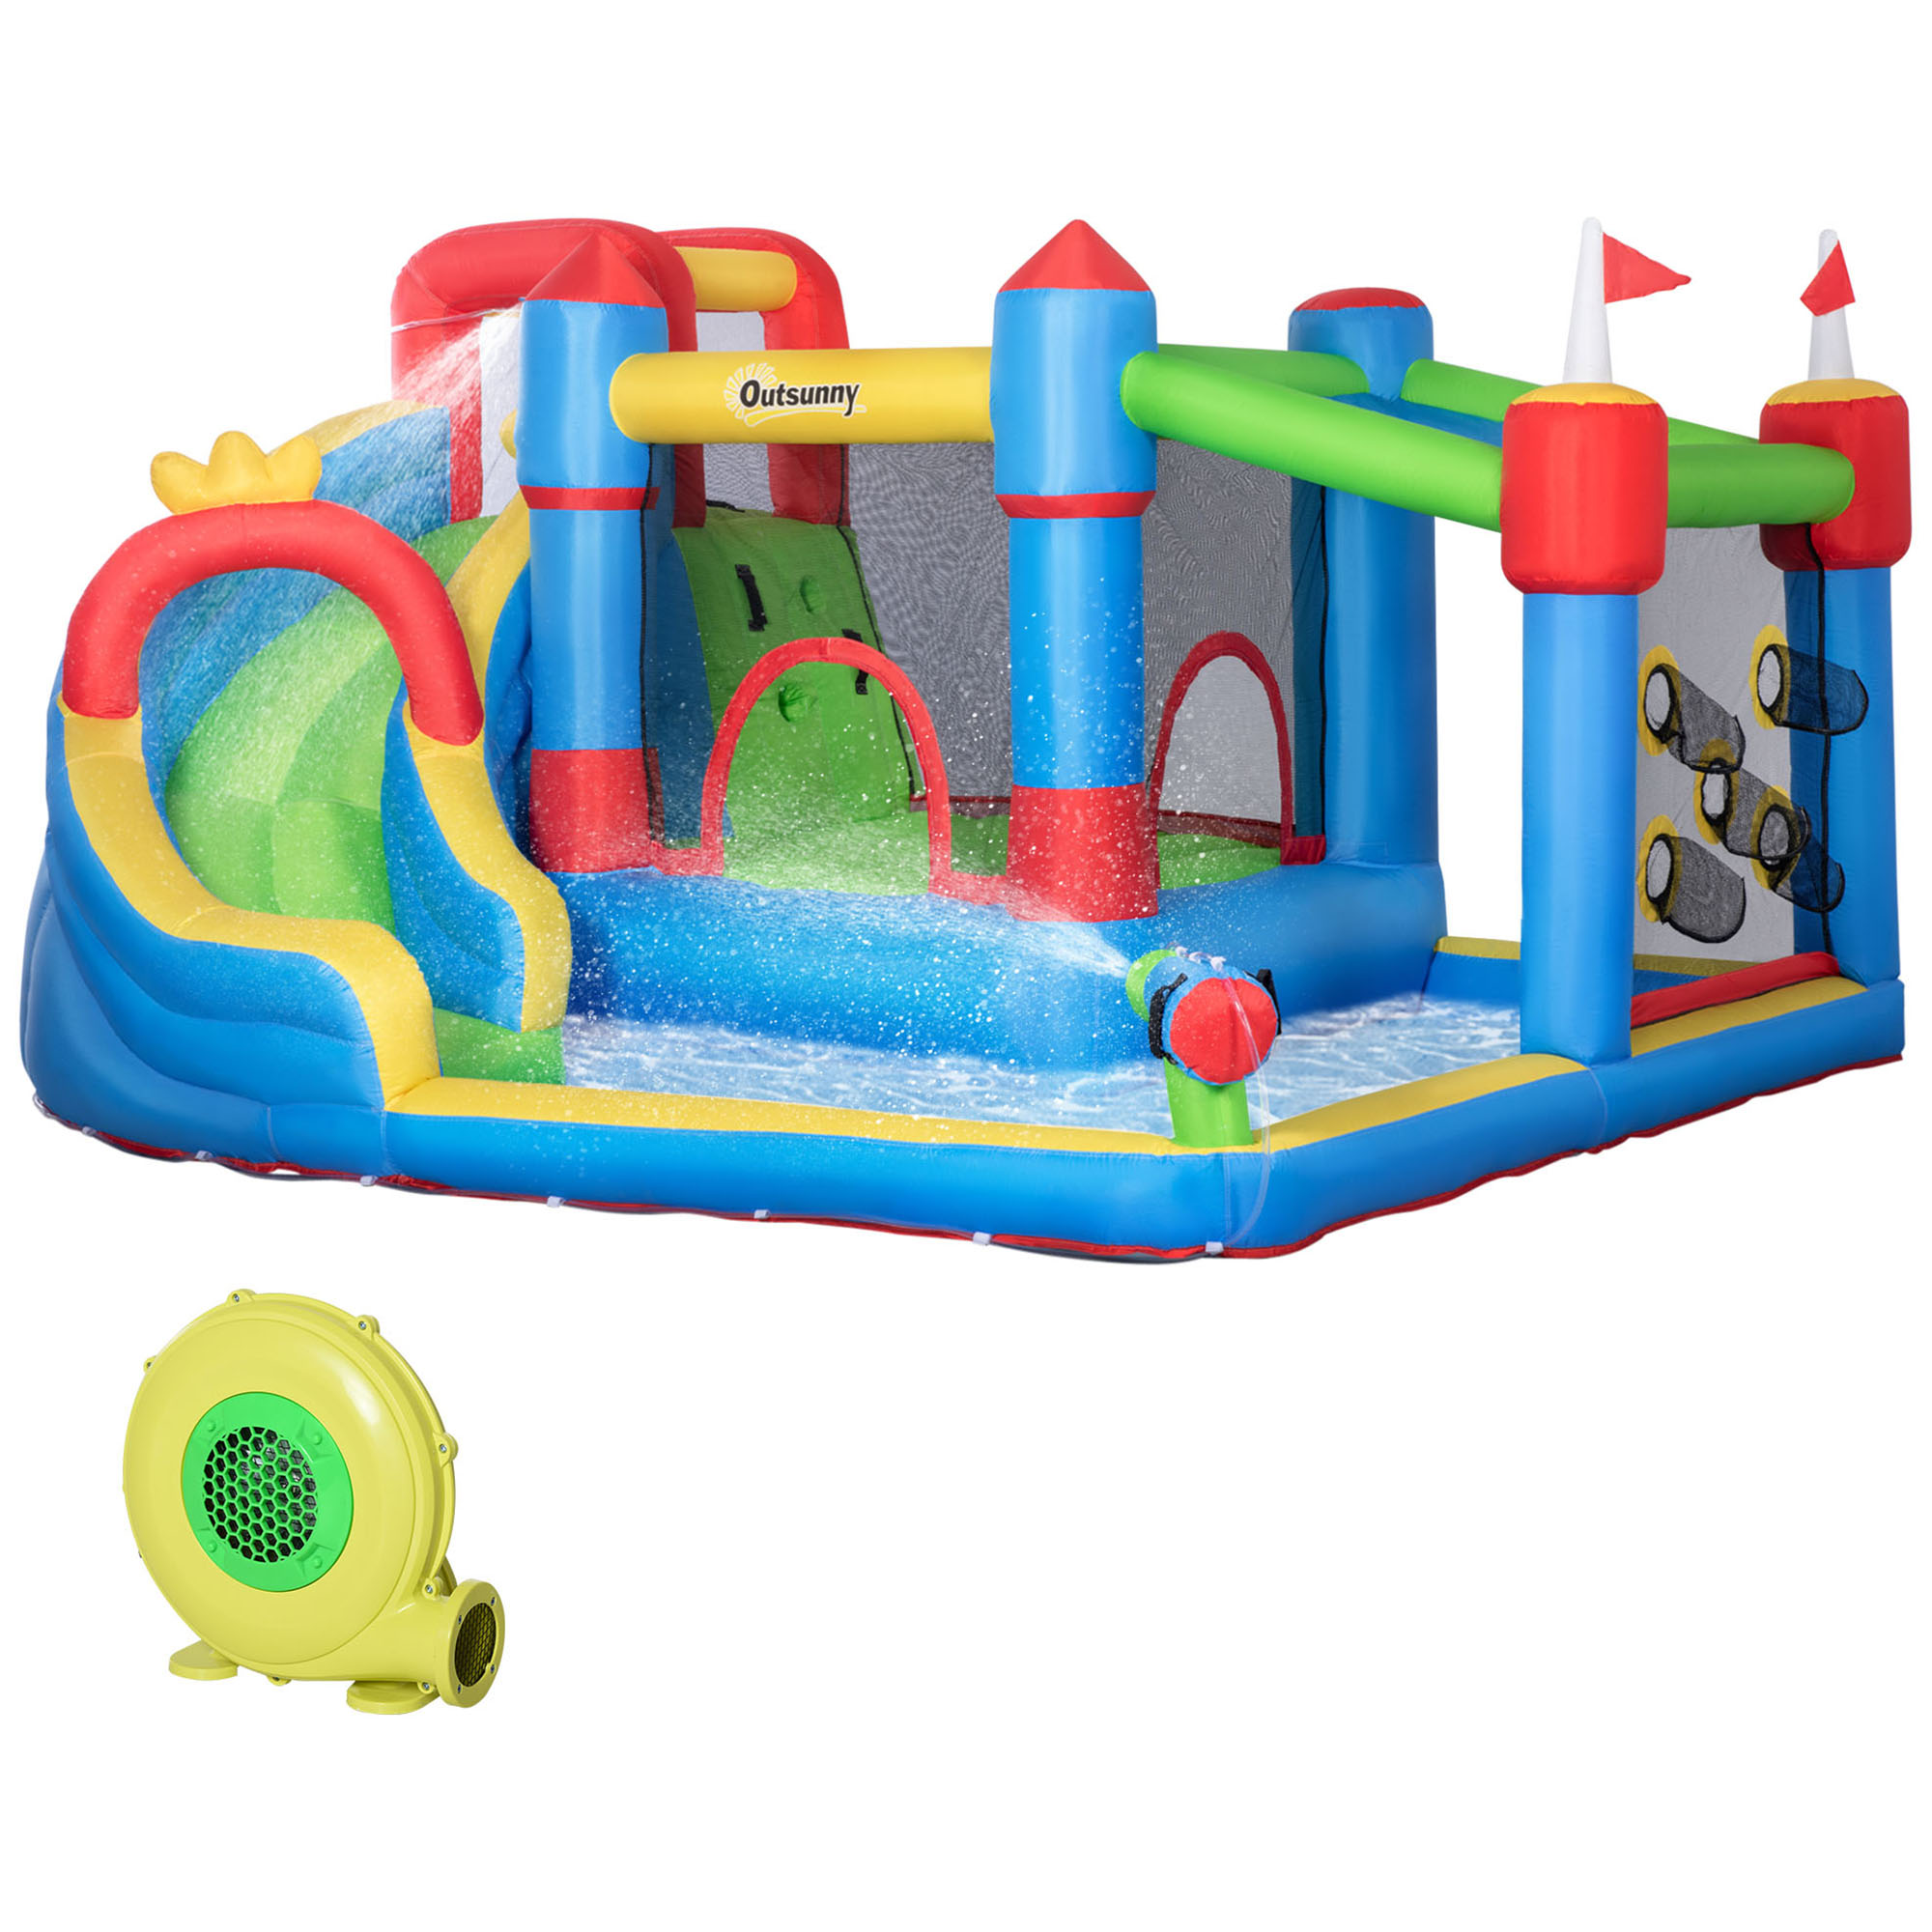 Outsunny Bouncy Castle για παιδιά με τσουλήθρα